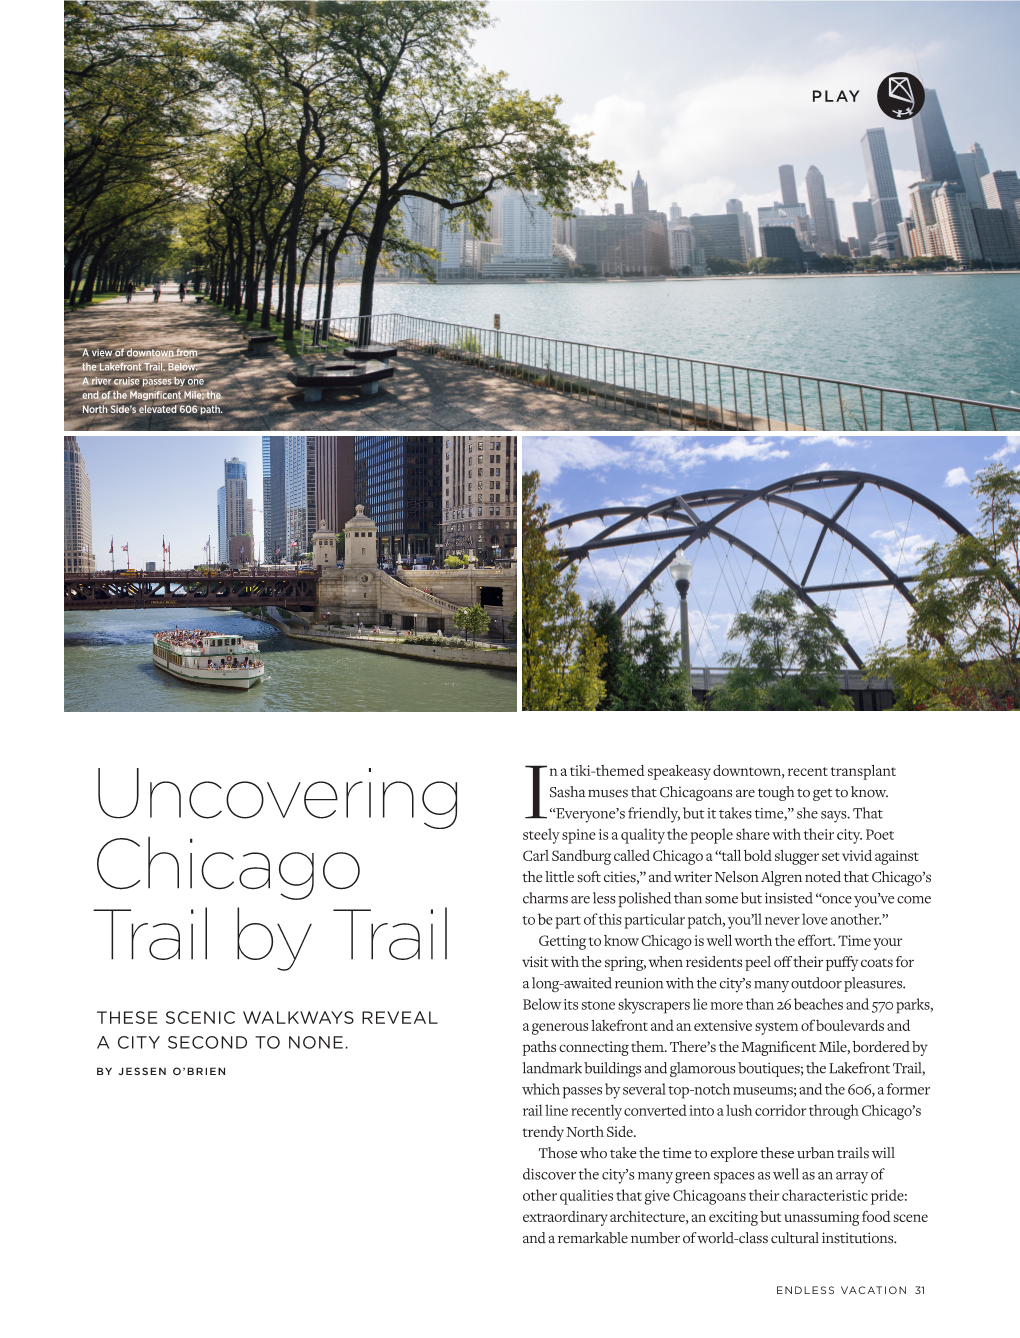 Uncovering Chicago Trail by Trail